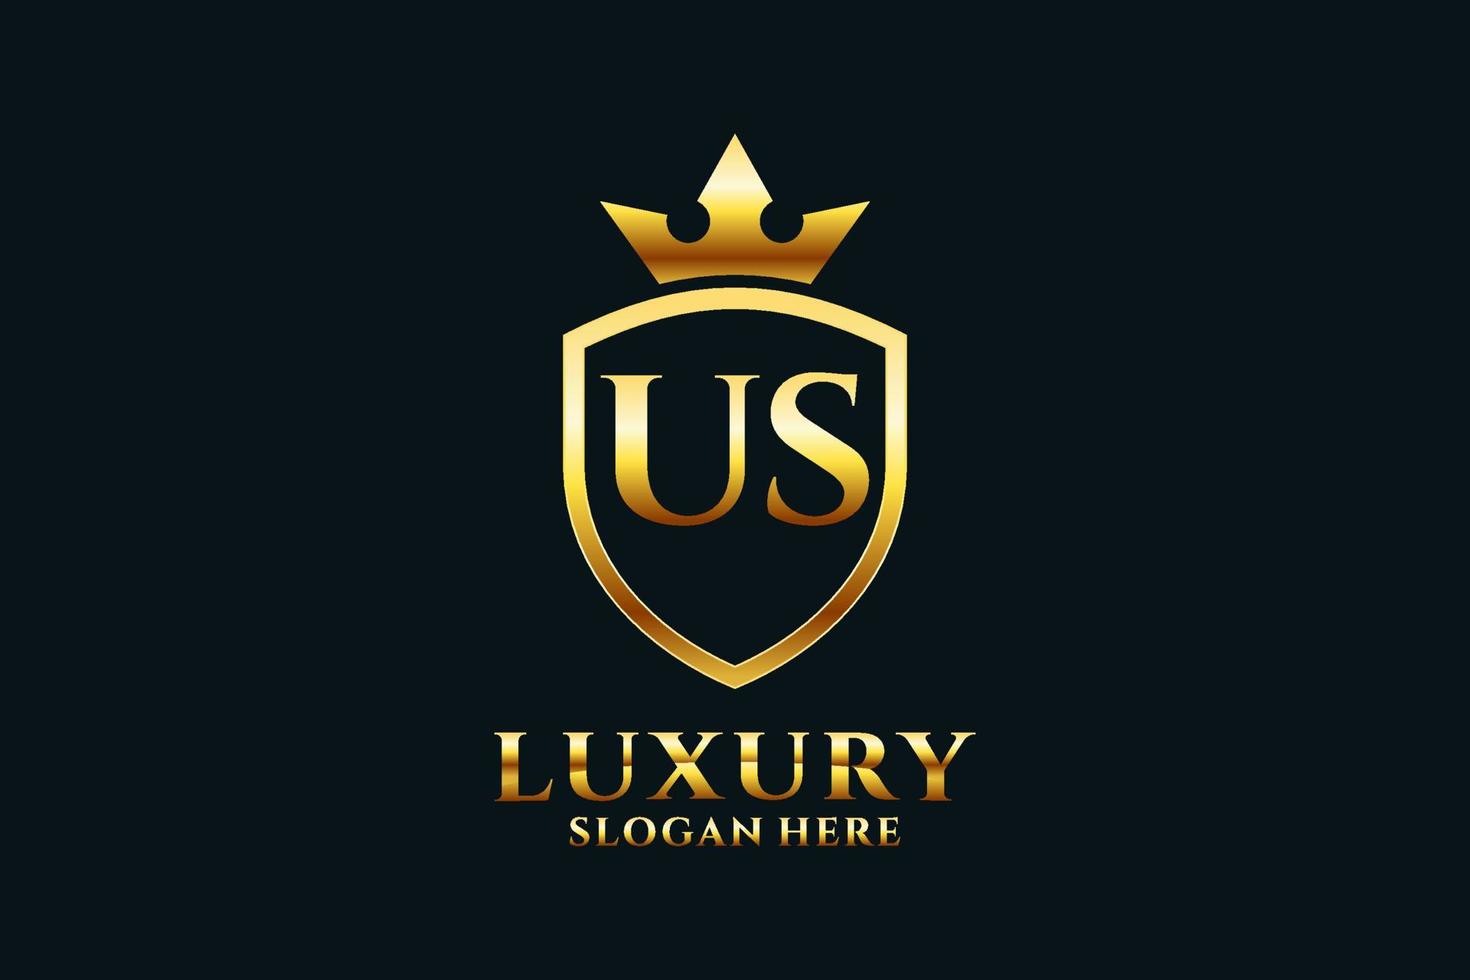 initial US elegant luxury monogram logo or badge template with scrolls and royal crown - perfect for luxurious branding projects vector